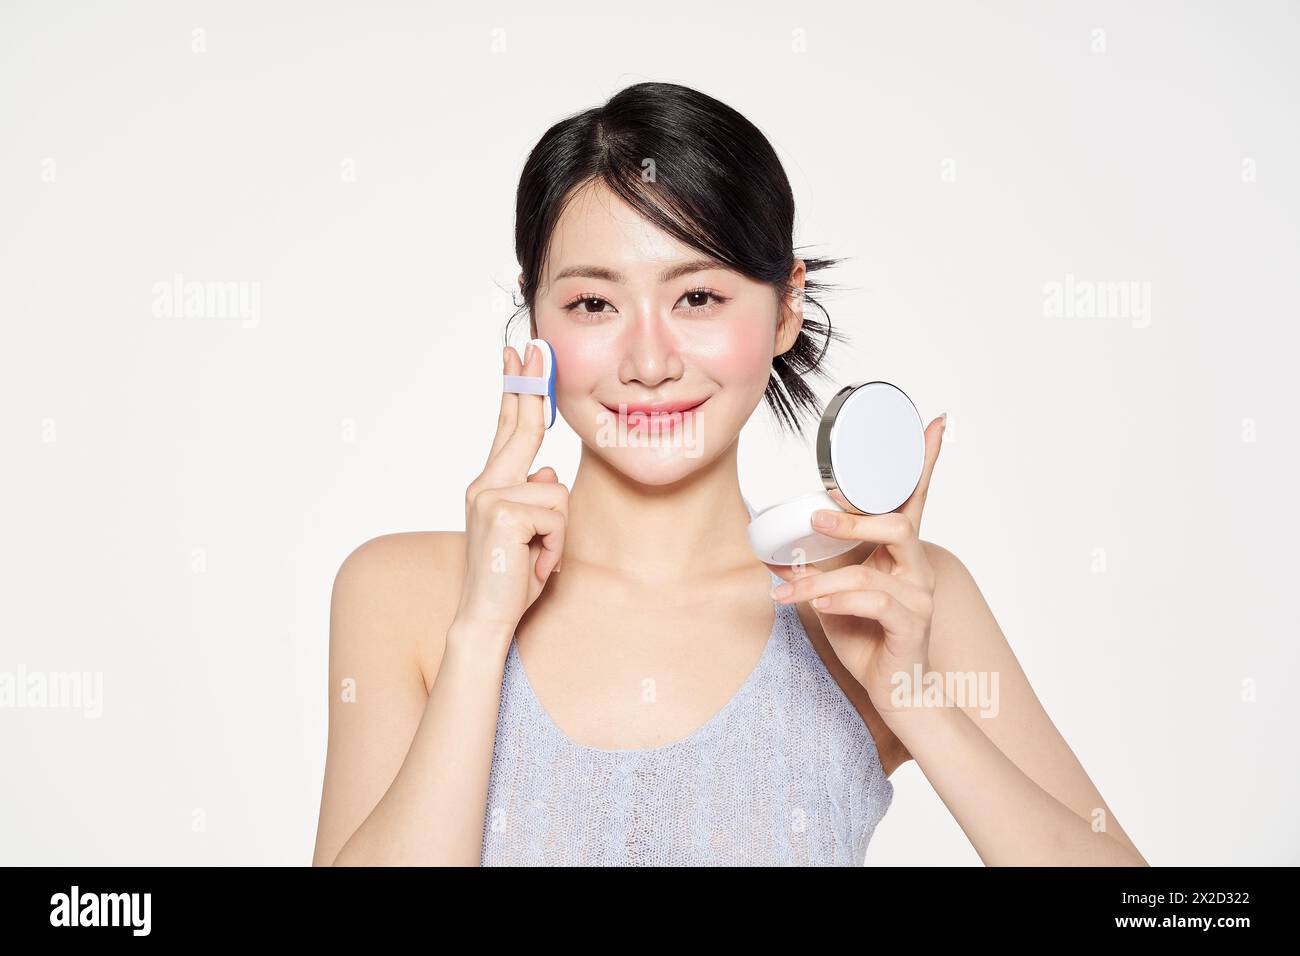 Asian Woman Putting Cushion Facts on Her Face Stock Photo